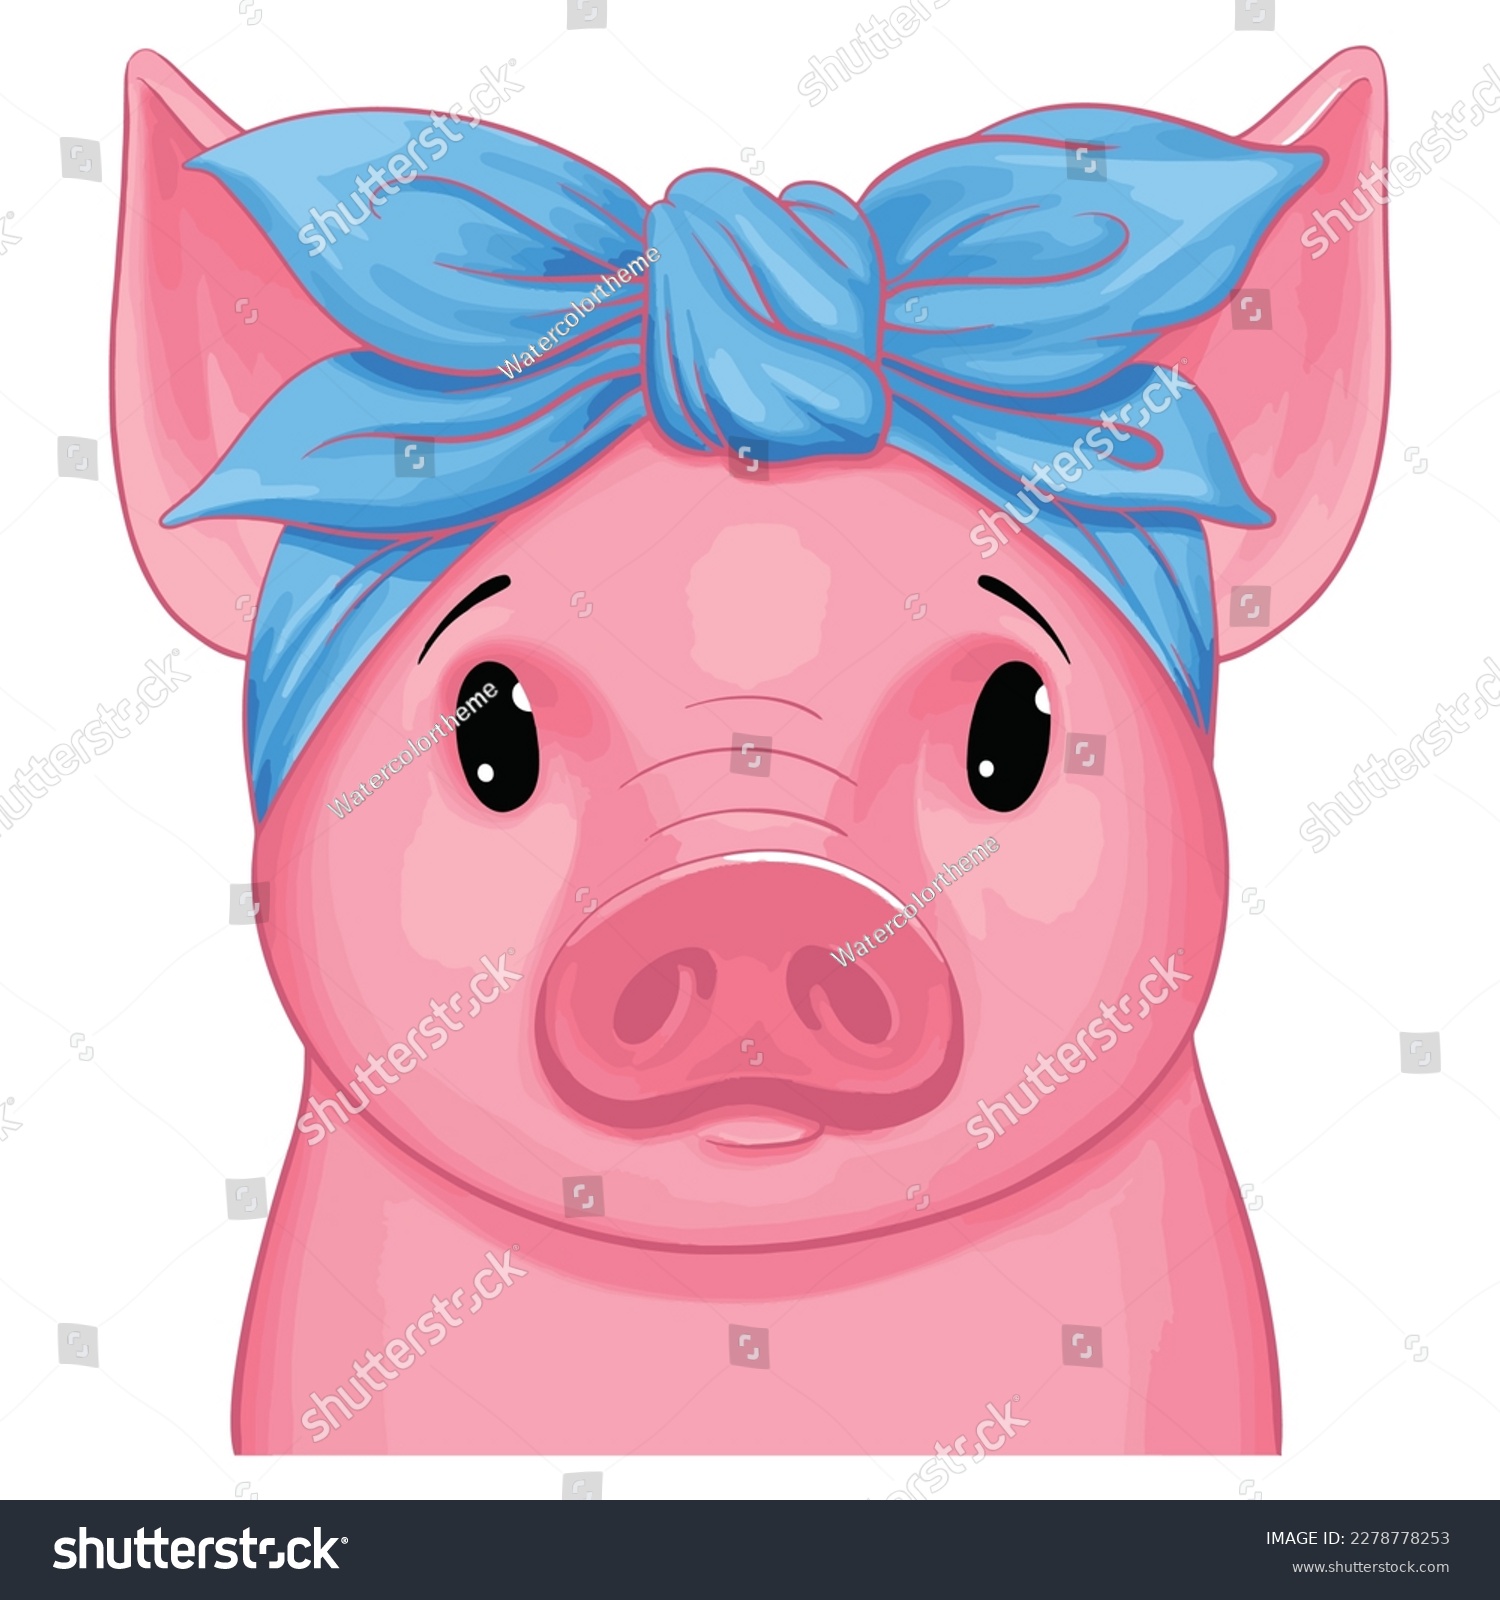 SVG of Cute Pig with bandana,Pig vector,Cartoon Pig,Farm Animal,Animal Vector,Cute Pig,Pink Pig Vector,Pig Face Vector,Pig Cut File,Pig Svg,Pig Clipart svg